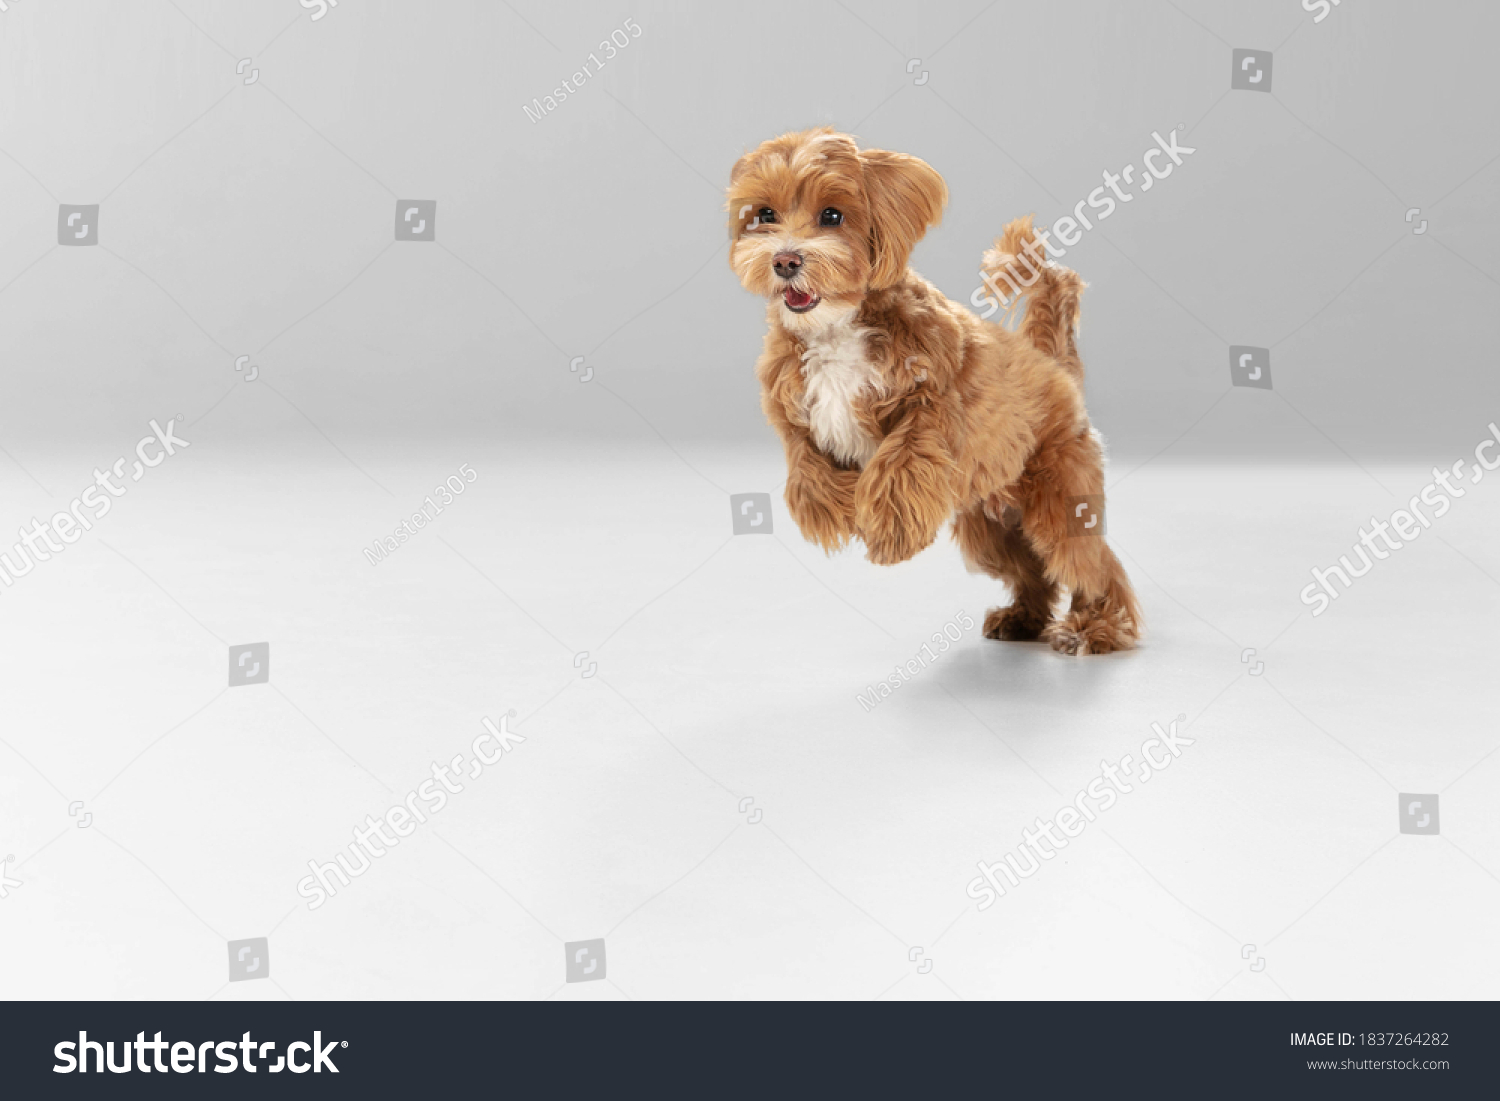 On the run. Maltipu little dog is posing. Cute playful braun doggy or pet playing on white studio background. Concept of motion, action, movement, pets love. Looks happy, delighted, funny. #1837264282